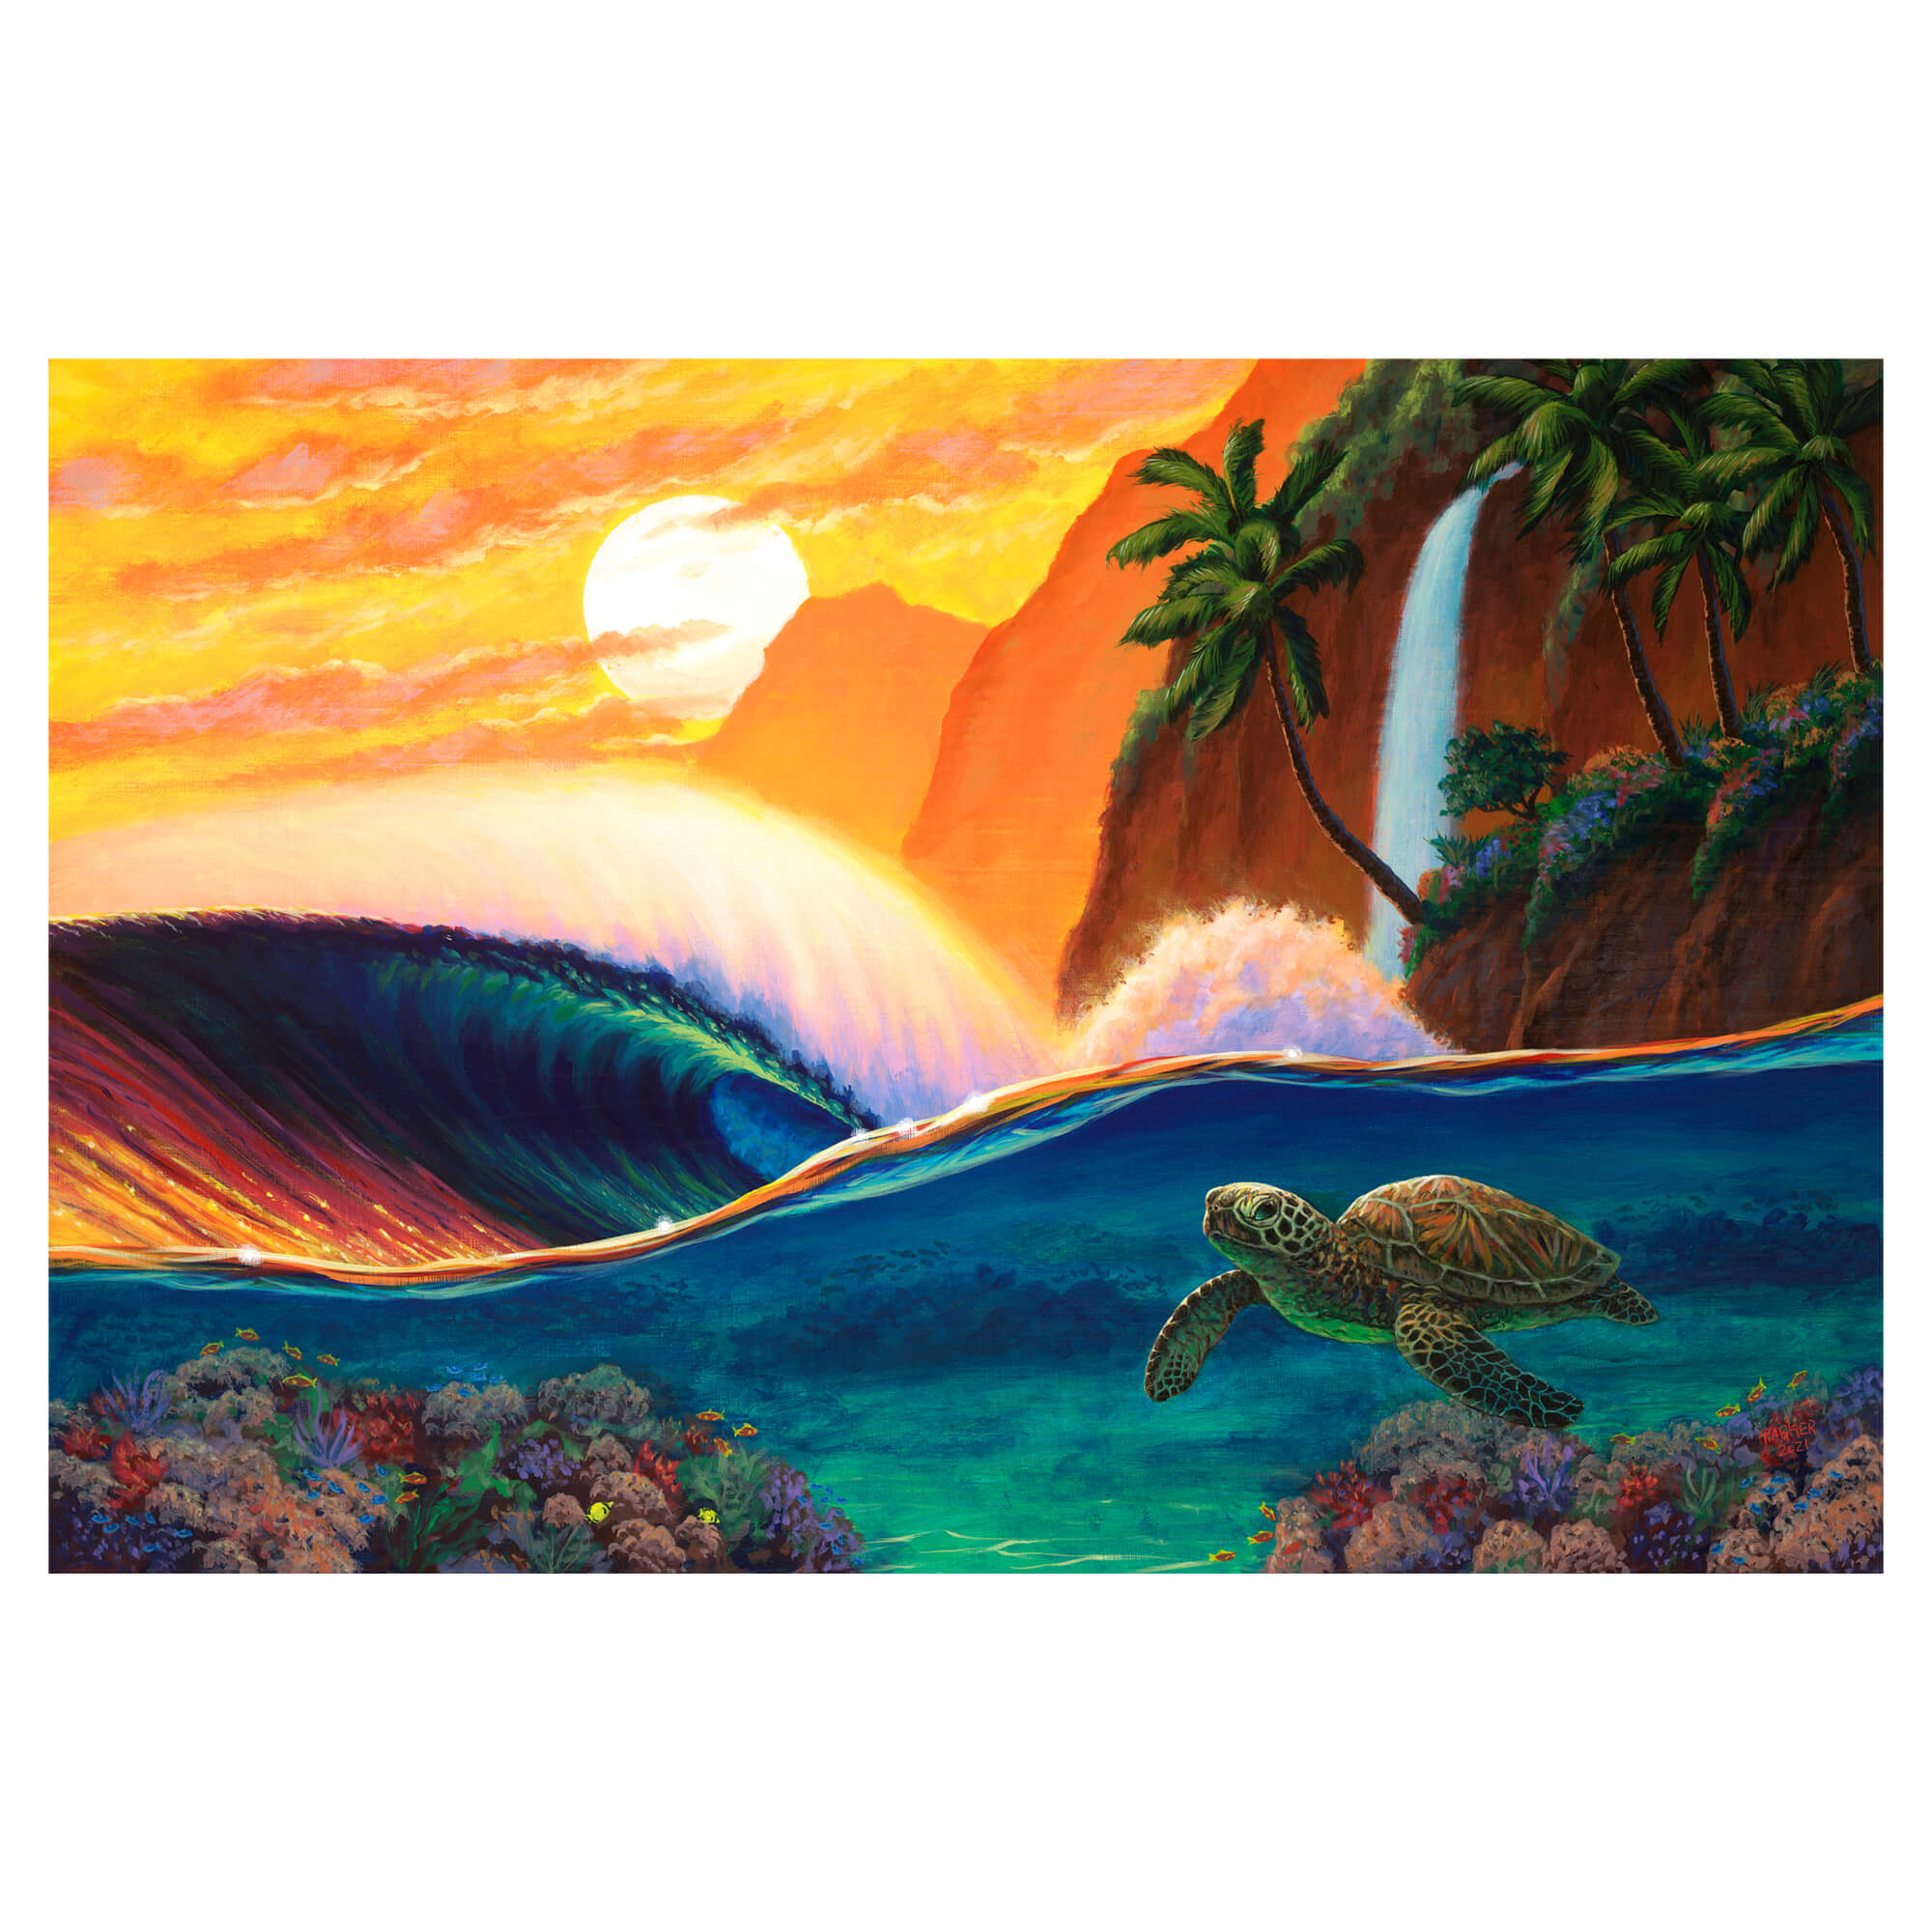 A canvas giclée art print featuring a sea turtle swimming and a vibrant sunset, crashing waves, and a mountain waterfall background by Hawaii artist Patrick Parker